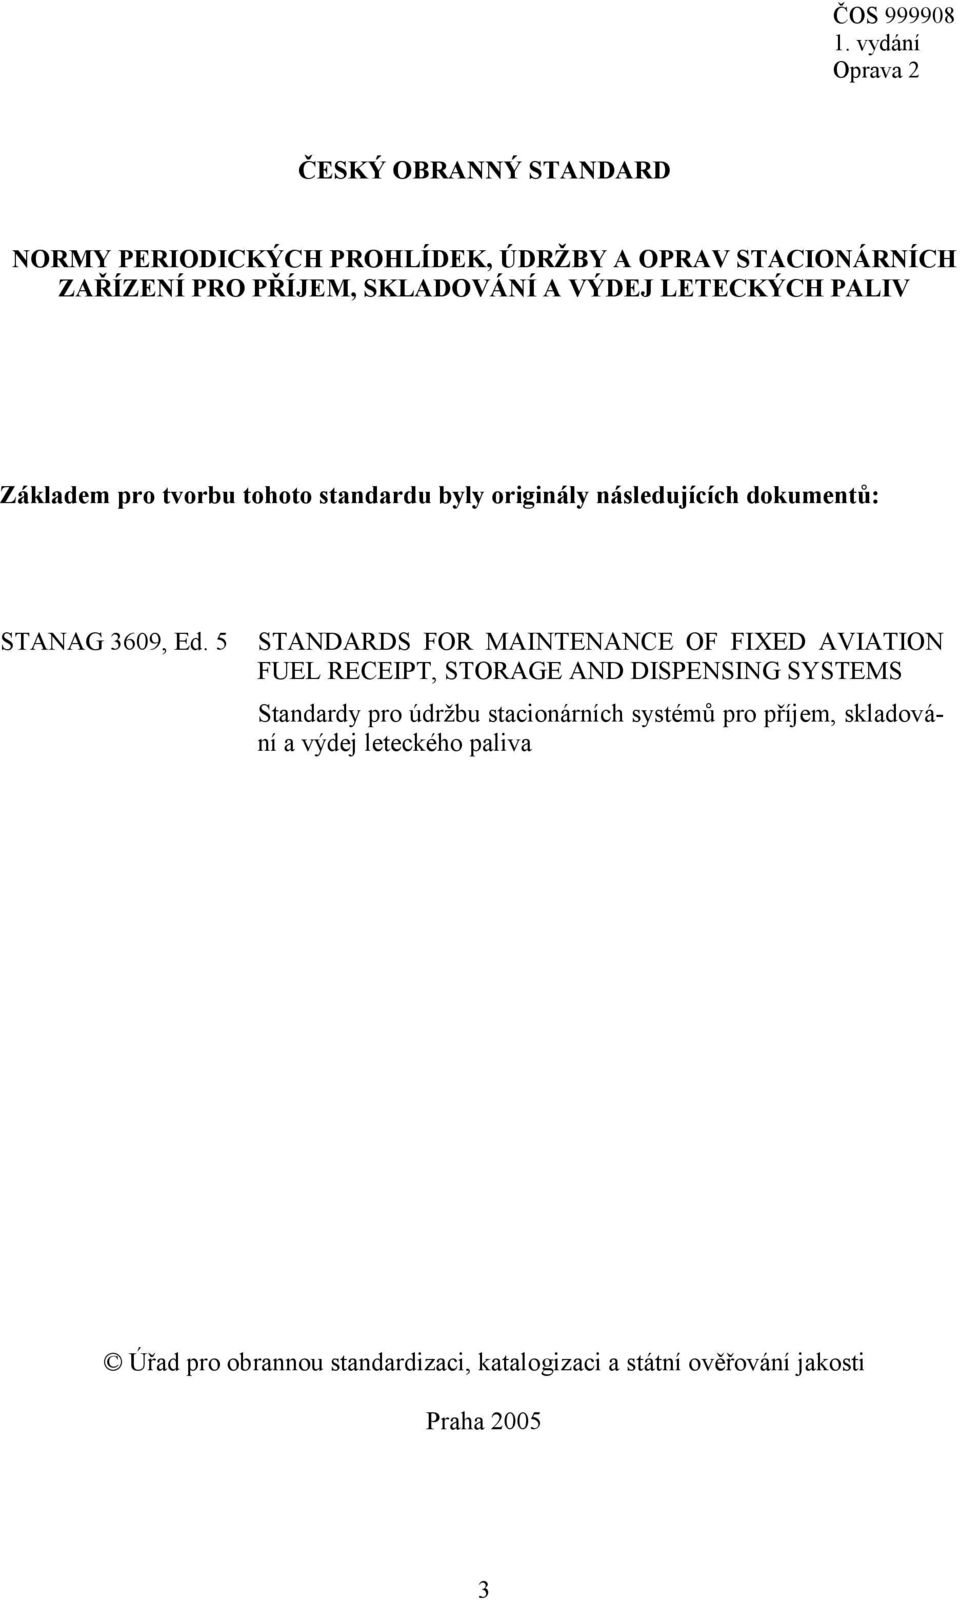 5 STANDARDS FOR MAINTENANCE OF FIXED AVIATION FUEL RECEIPT, STORAGE AND DISPENSING SYSTEMS Standardy pro údržbu